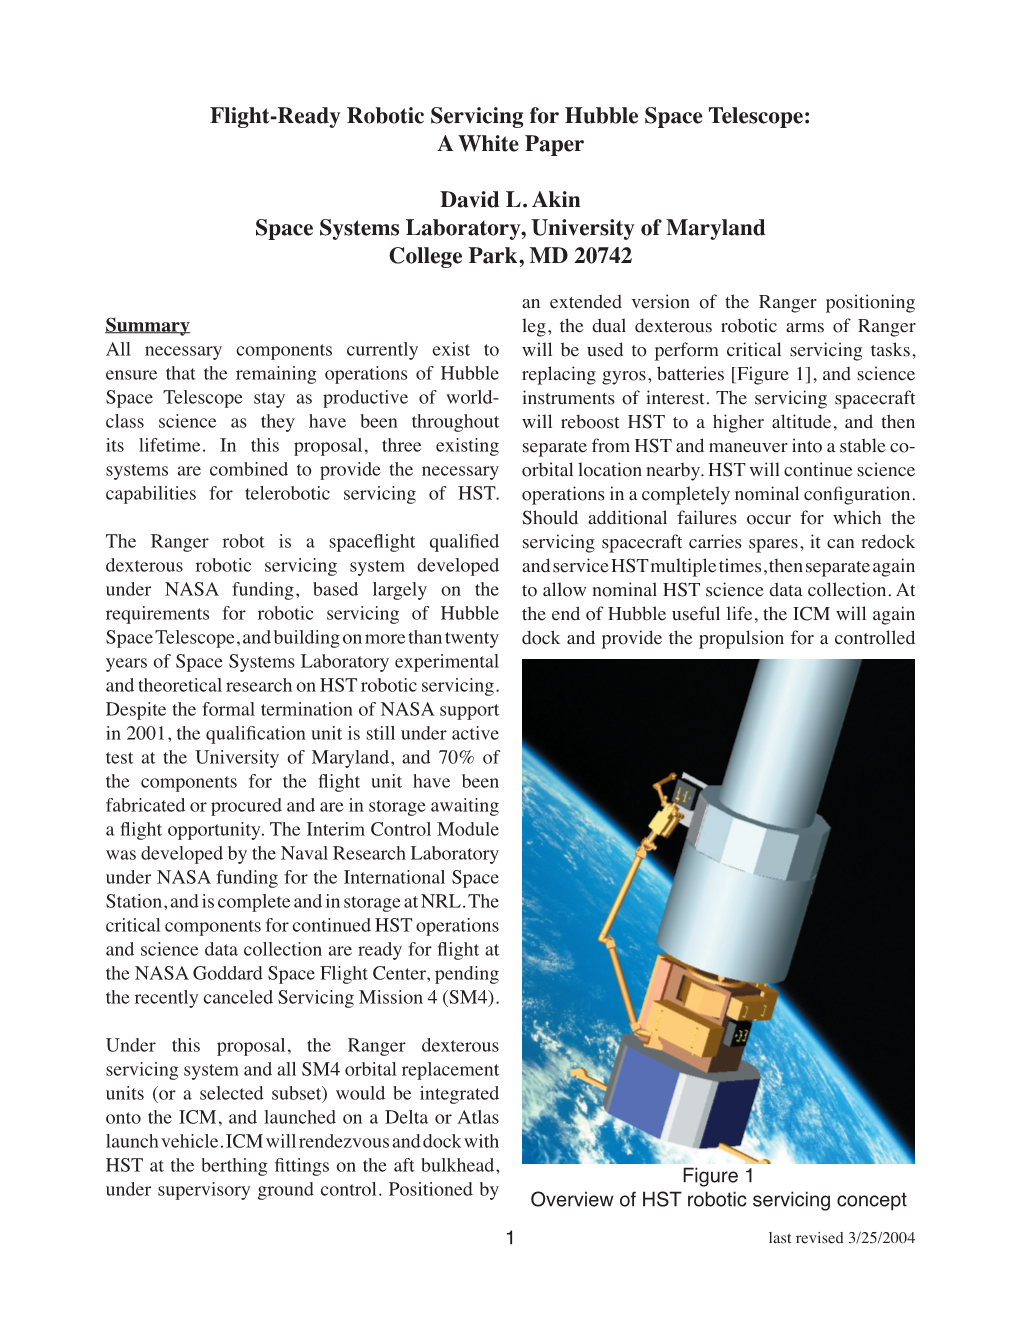 Flight-Ready Robotic Servicing for Hubble Space Telescope: a White Paper